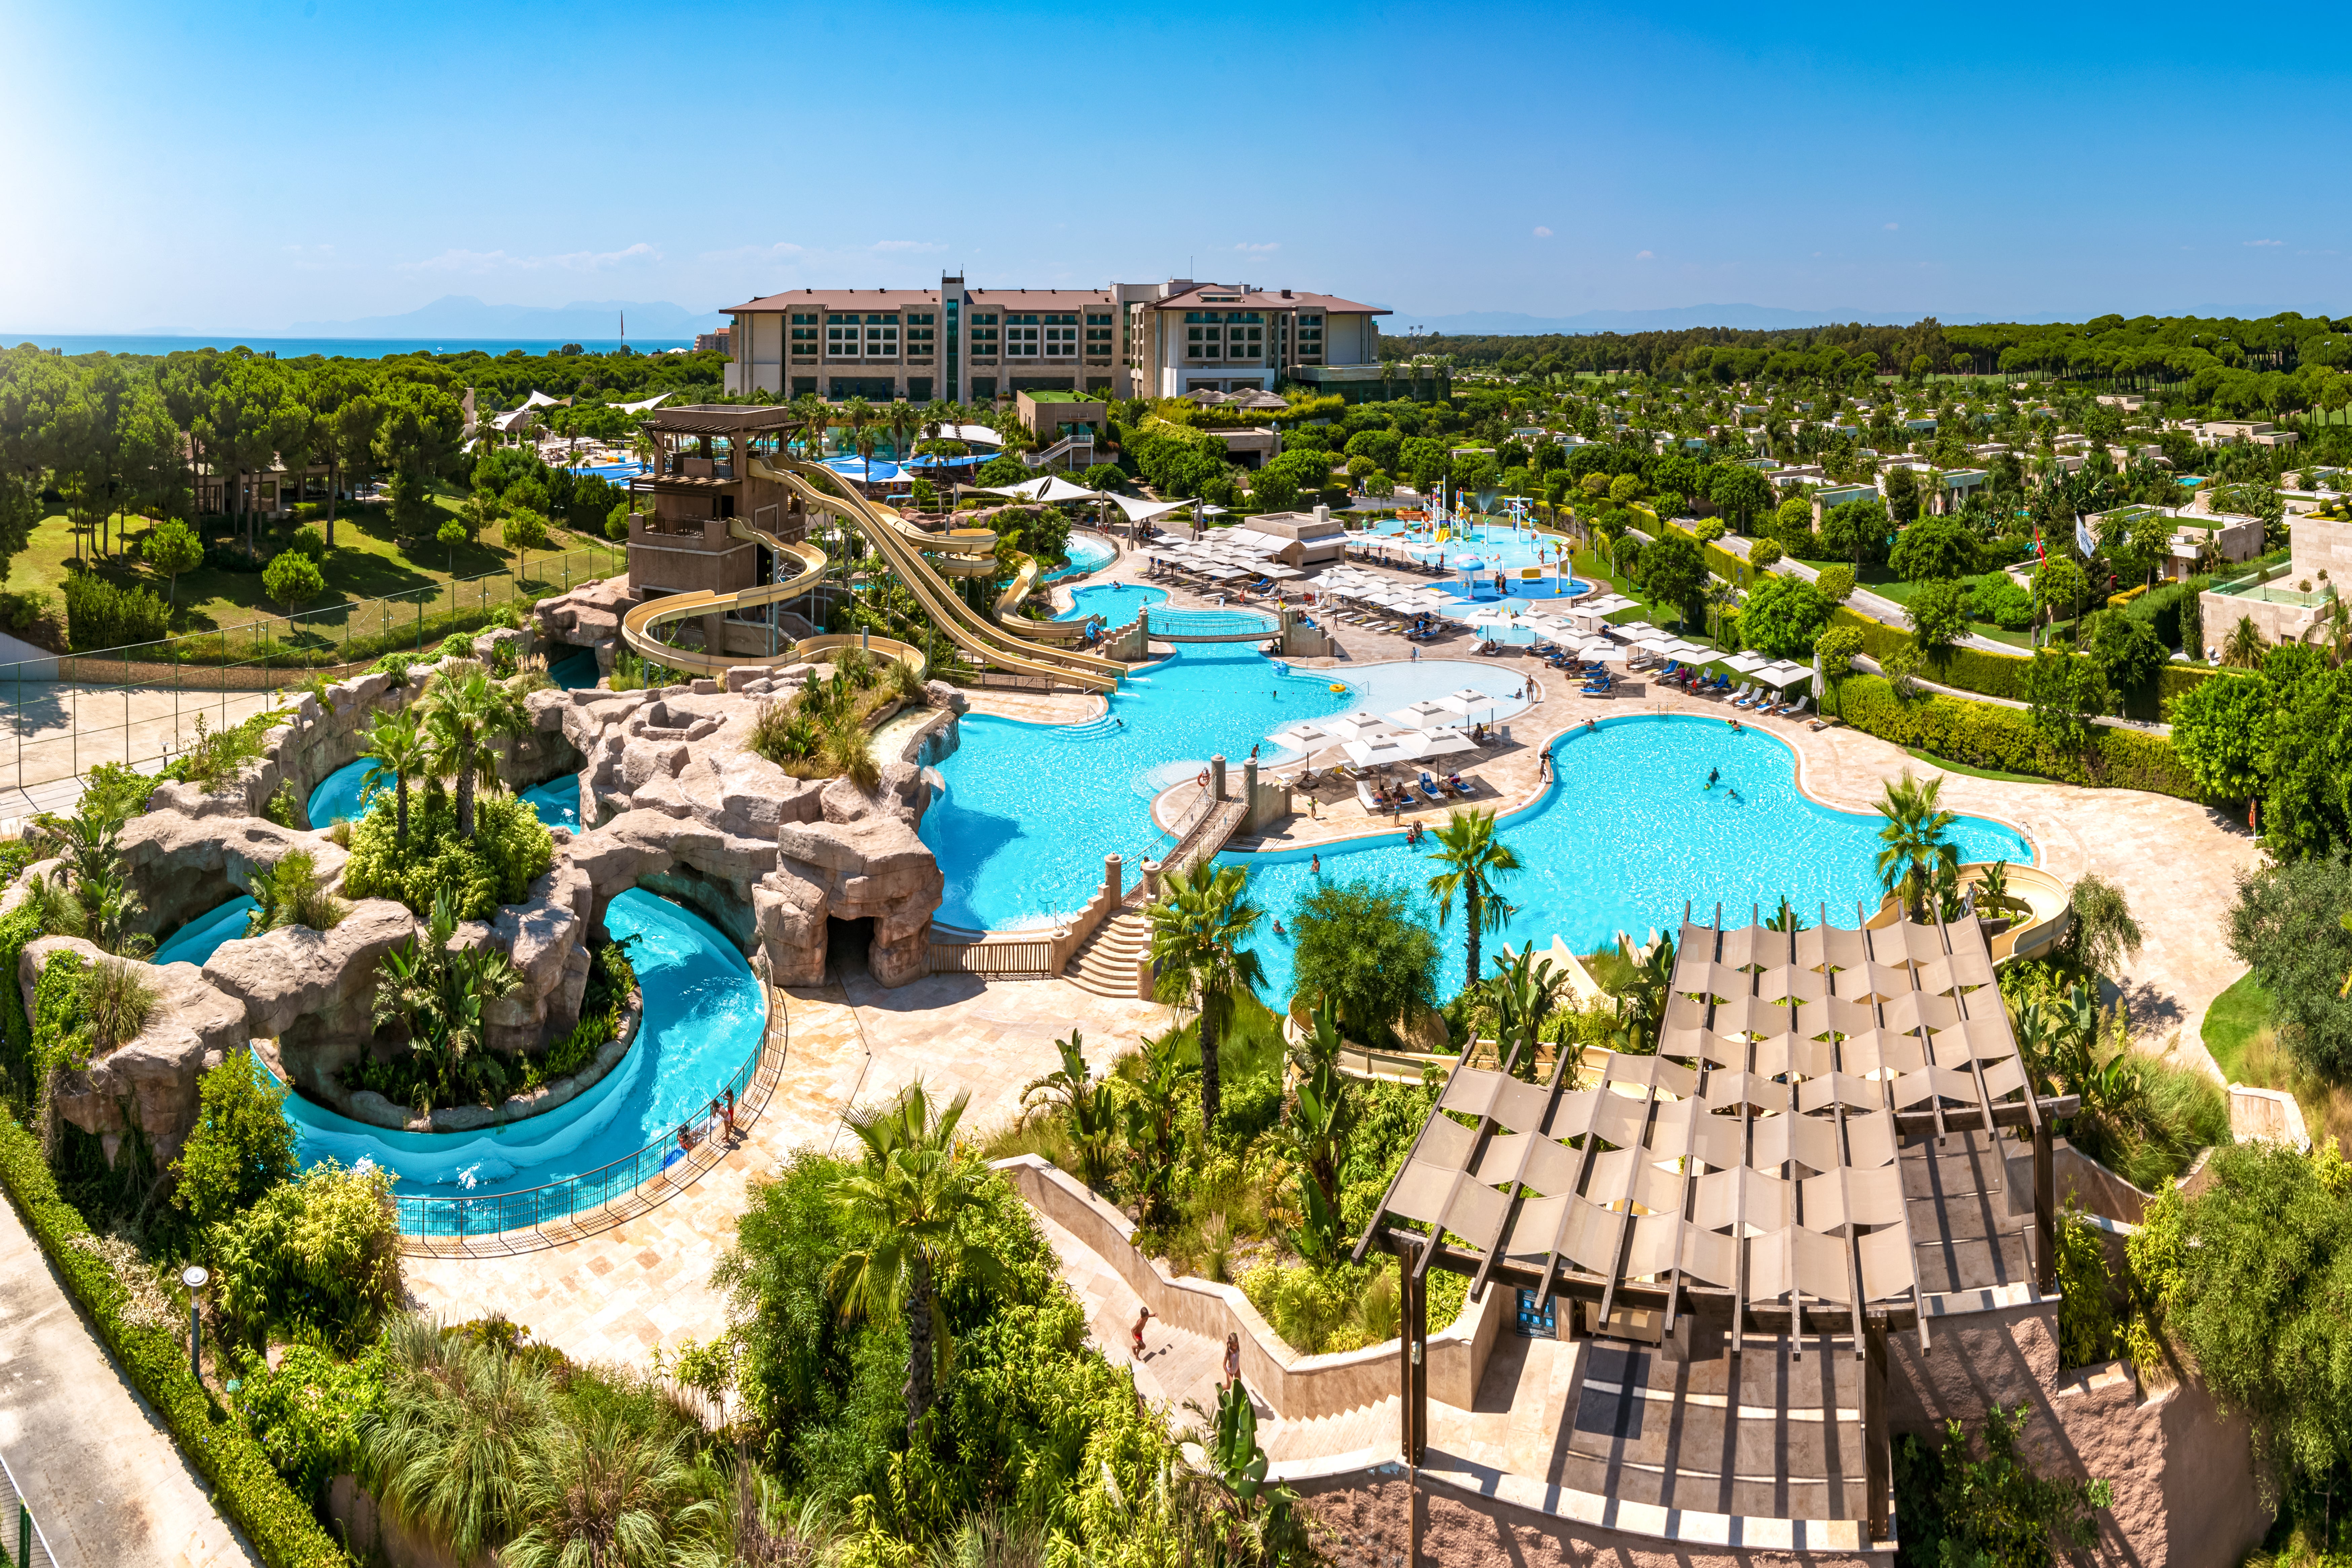 Enjoy golf rounds and stunning surrounds at the five-star Regnum Carya hotel